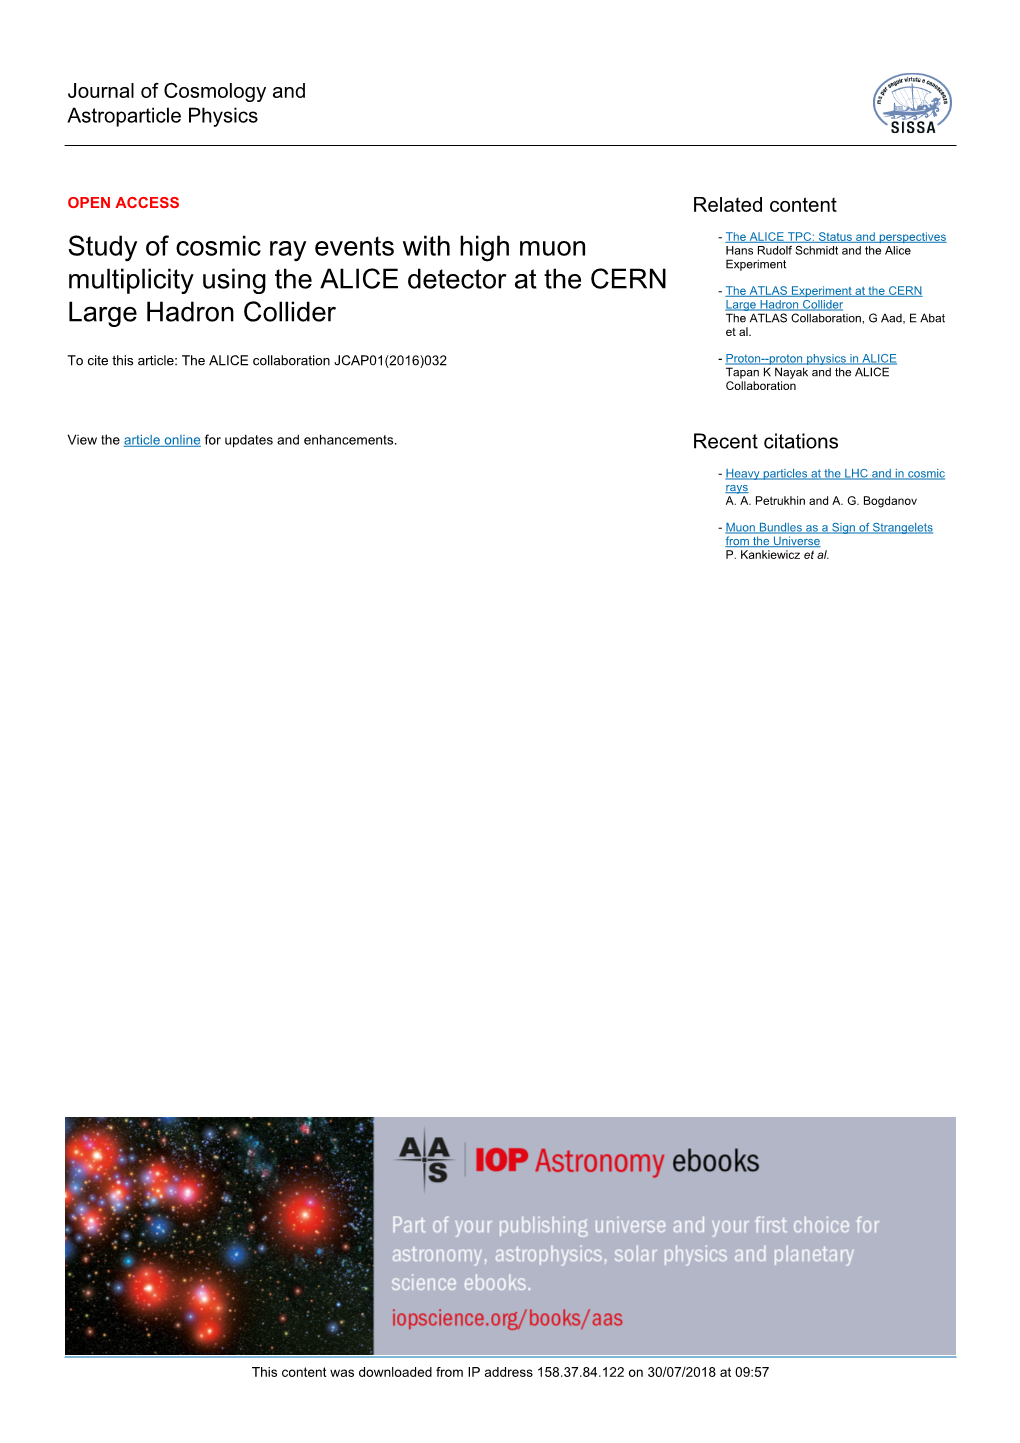 Study of Cosmic Ray Events with High Muon Multiplicity Using